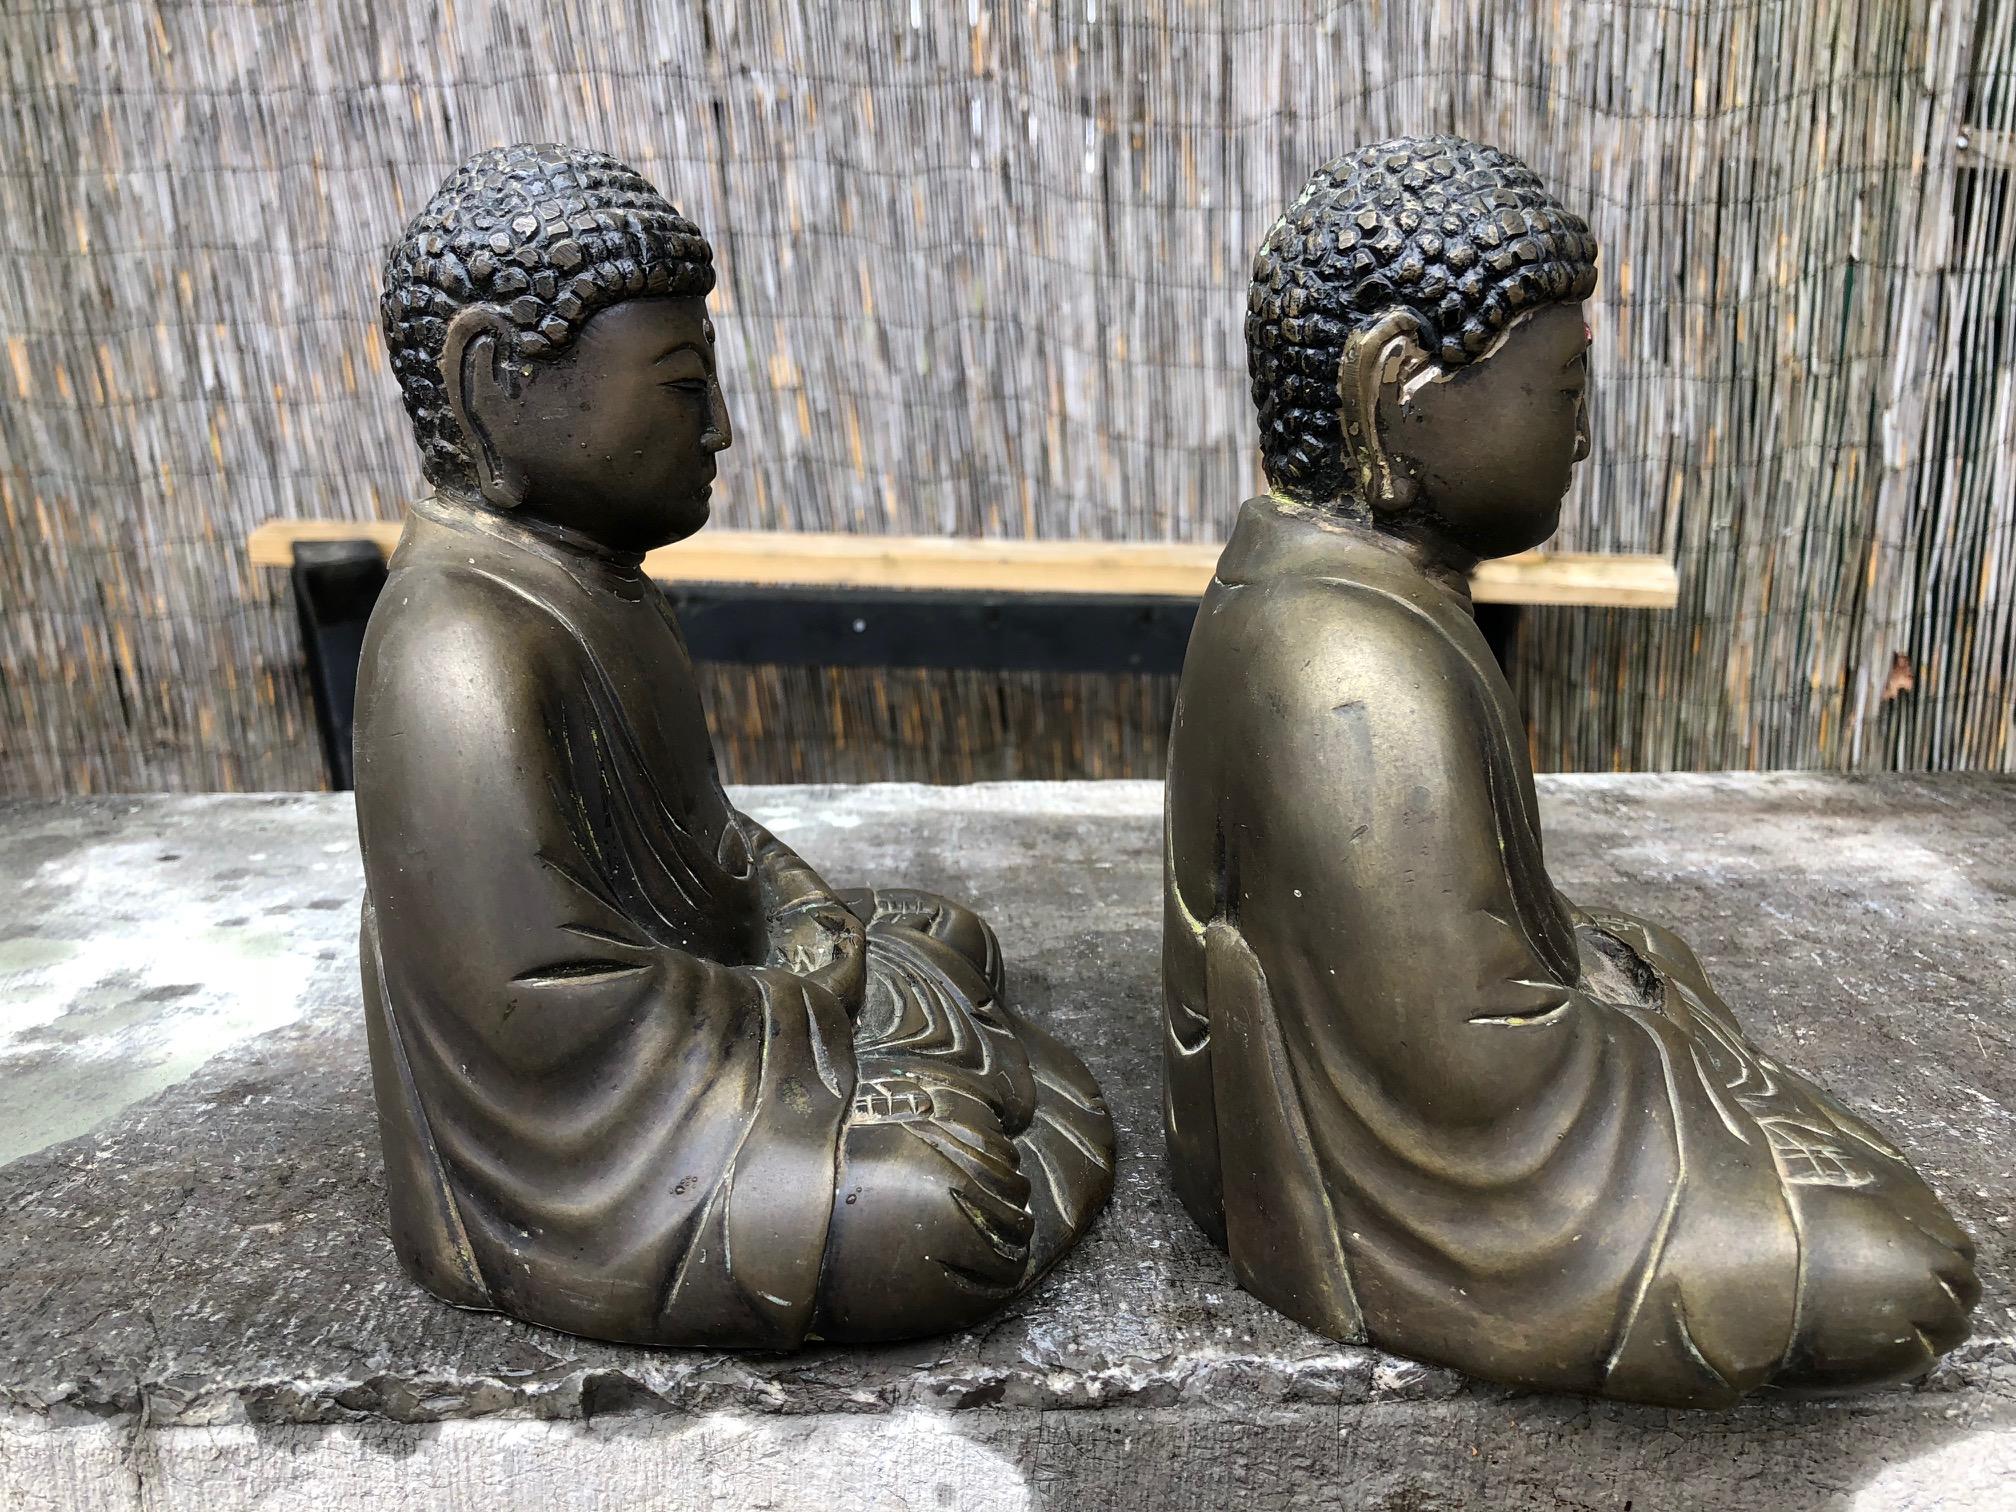 Japan, a fine near pair of old seated Buddhas, hand cast bronze with a Fine medium to dark brown patina performing the mudra of meditation or cosmic mudra.

These beautiful Buddha sculptures will bring serenity and timeless style to your home,